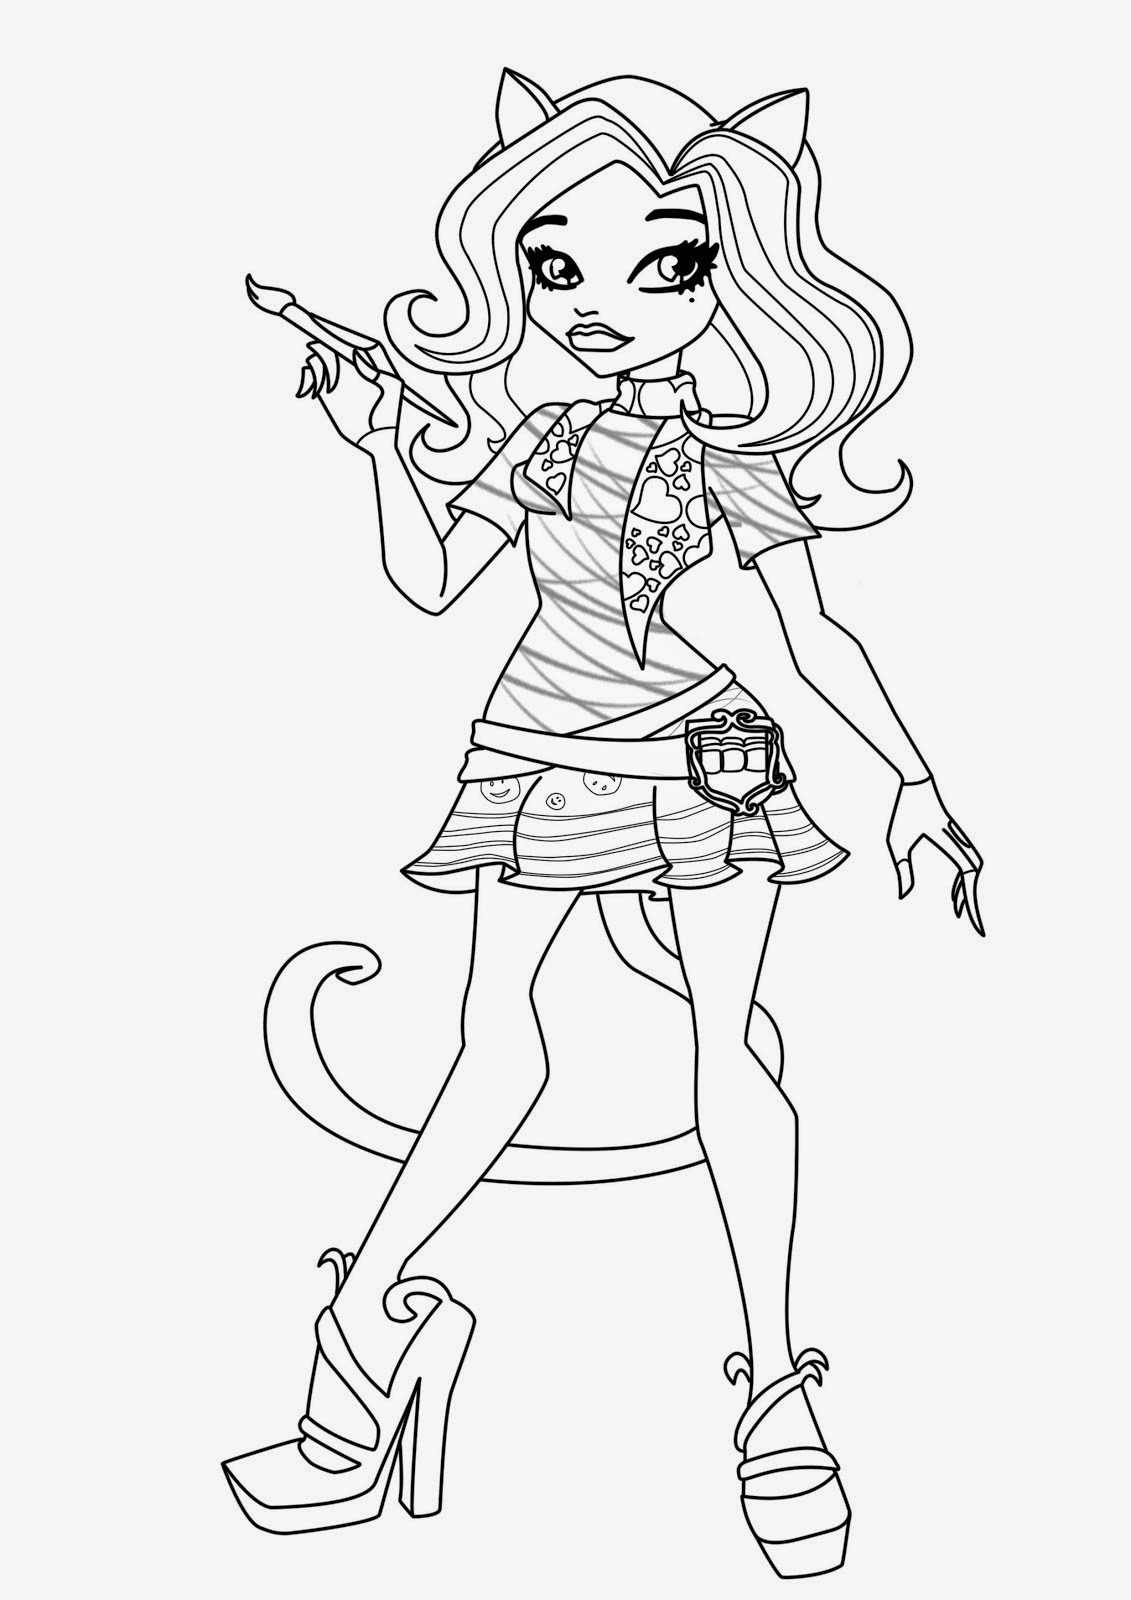 Free Printable Monster High Coloring Pages
 Coloring Pages Monster High Coloring Pages Free and Printable